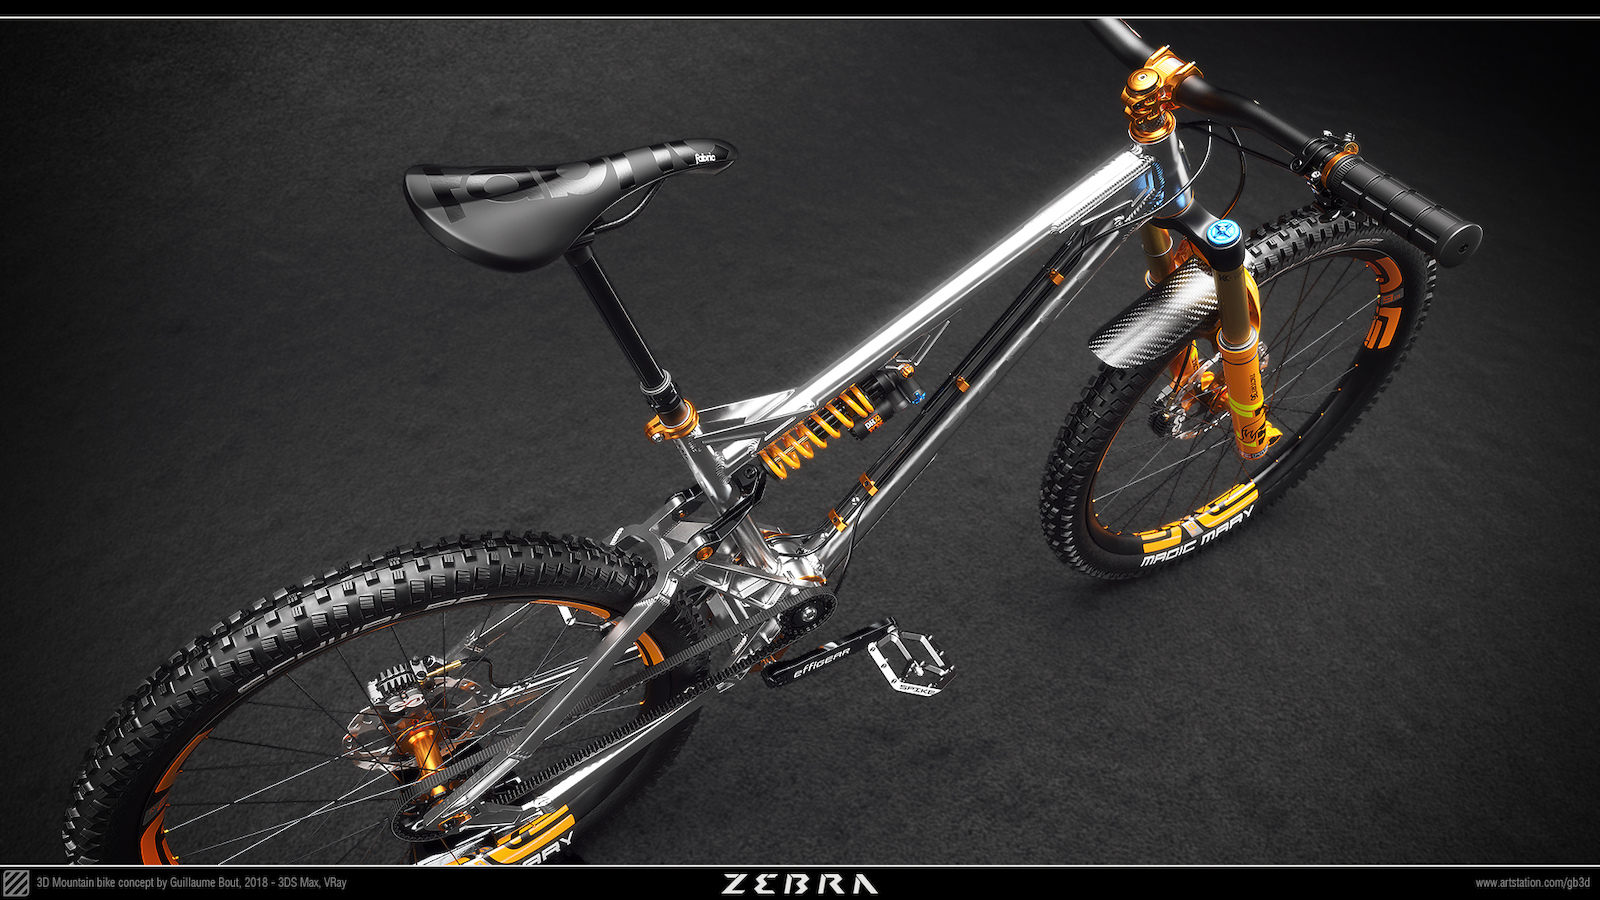 CGI bike concept based on an Effigear gearbox and inspired by Nicolaï style.
Made with 3DS Max and rendered with VRay.

Here's a link to my artstation portfolio, I may add more bikes in the future : https://www.artstation.com/gb3d